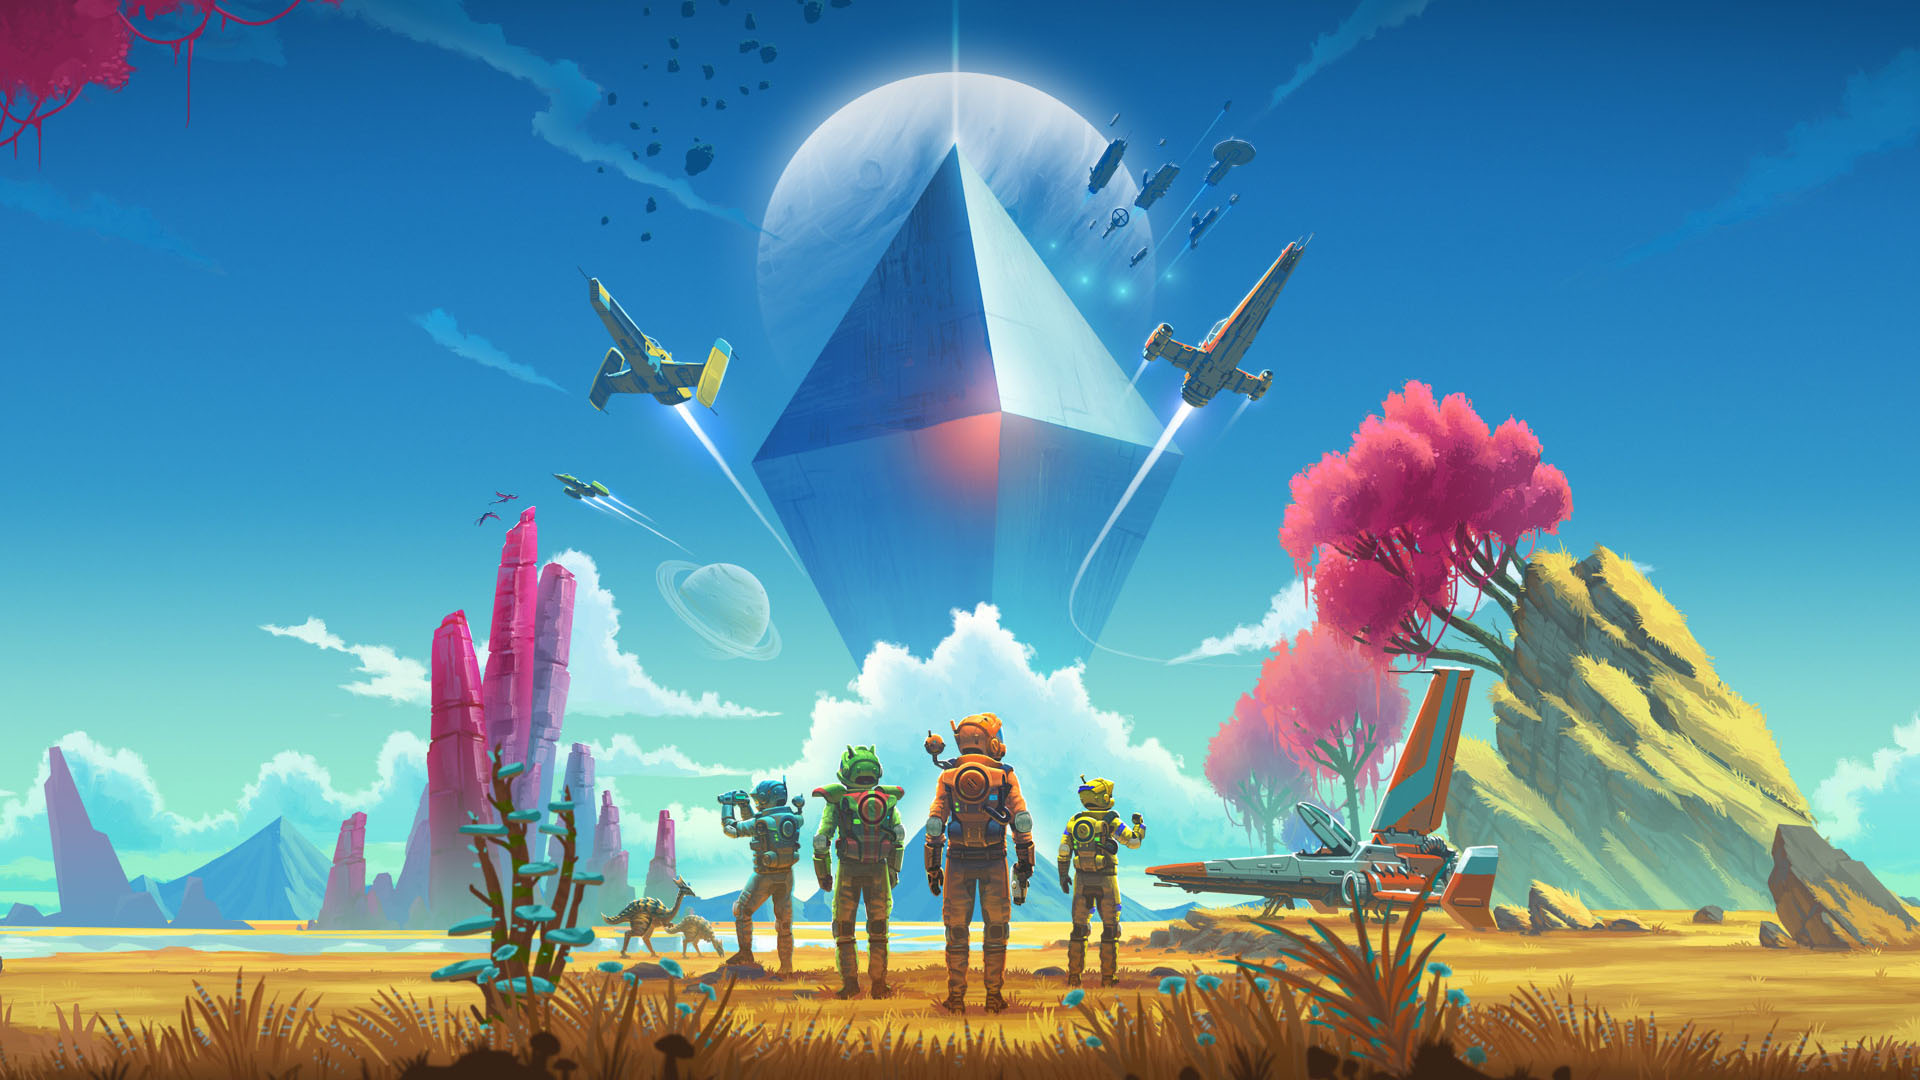 Best open-world games: several astronauts in No Man's Sky standing on an alien planet with pink trees growing on a mountain. Several starships are taking off, while a huge rhombus structure looms in the distance.